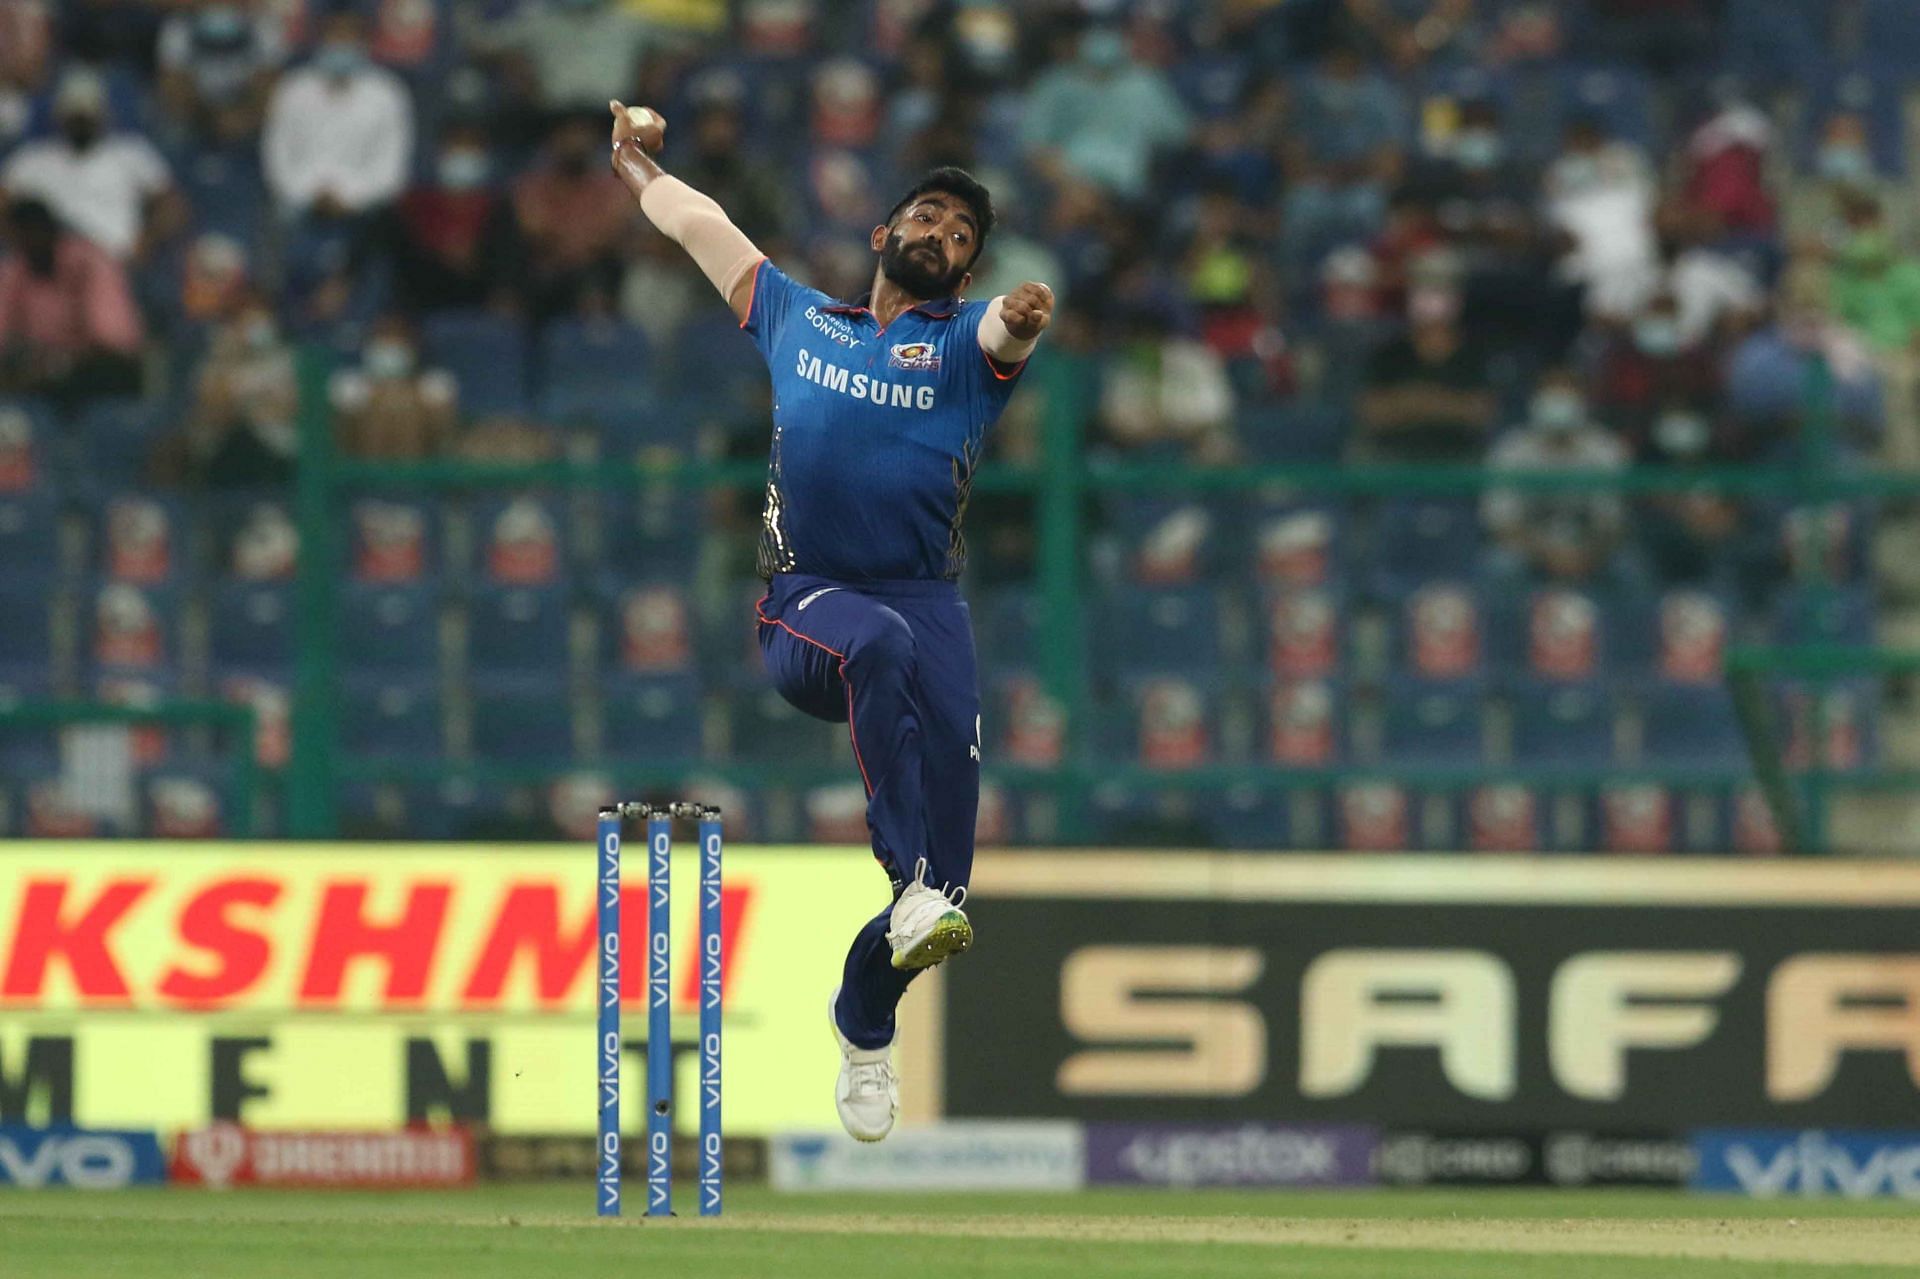 Jasprit Bumrah has picked up 130 wickets in his IPL career (Image Courtesy: IPLT20.com).